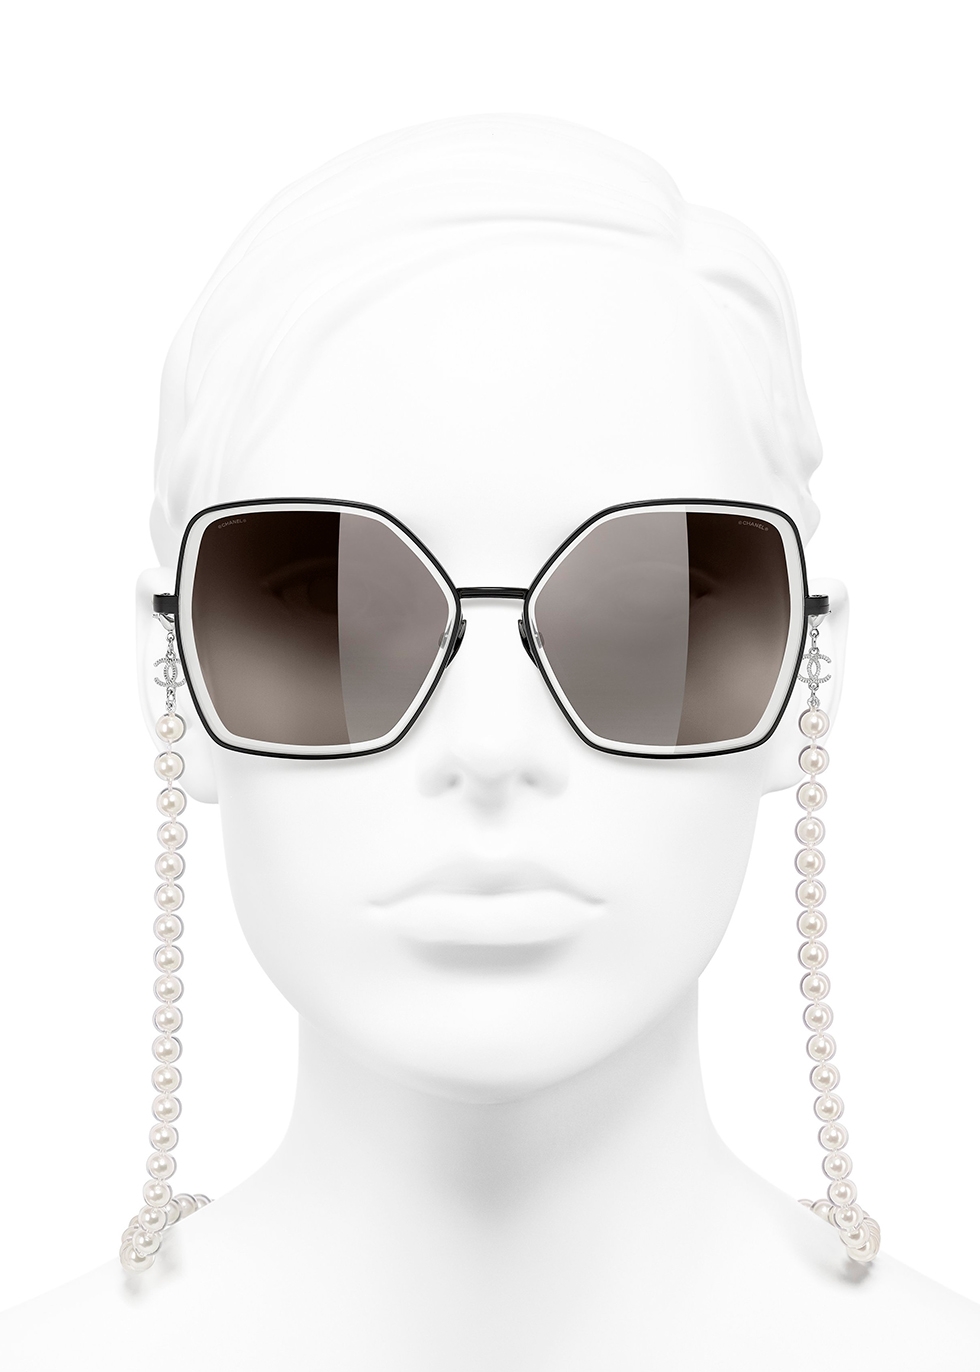 CHANEL  Accessories  Chanel Butterfly Removable Pearl Chain Sunglasses   Poshmark